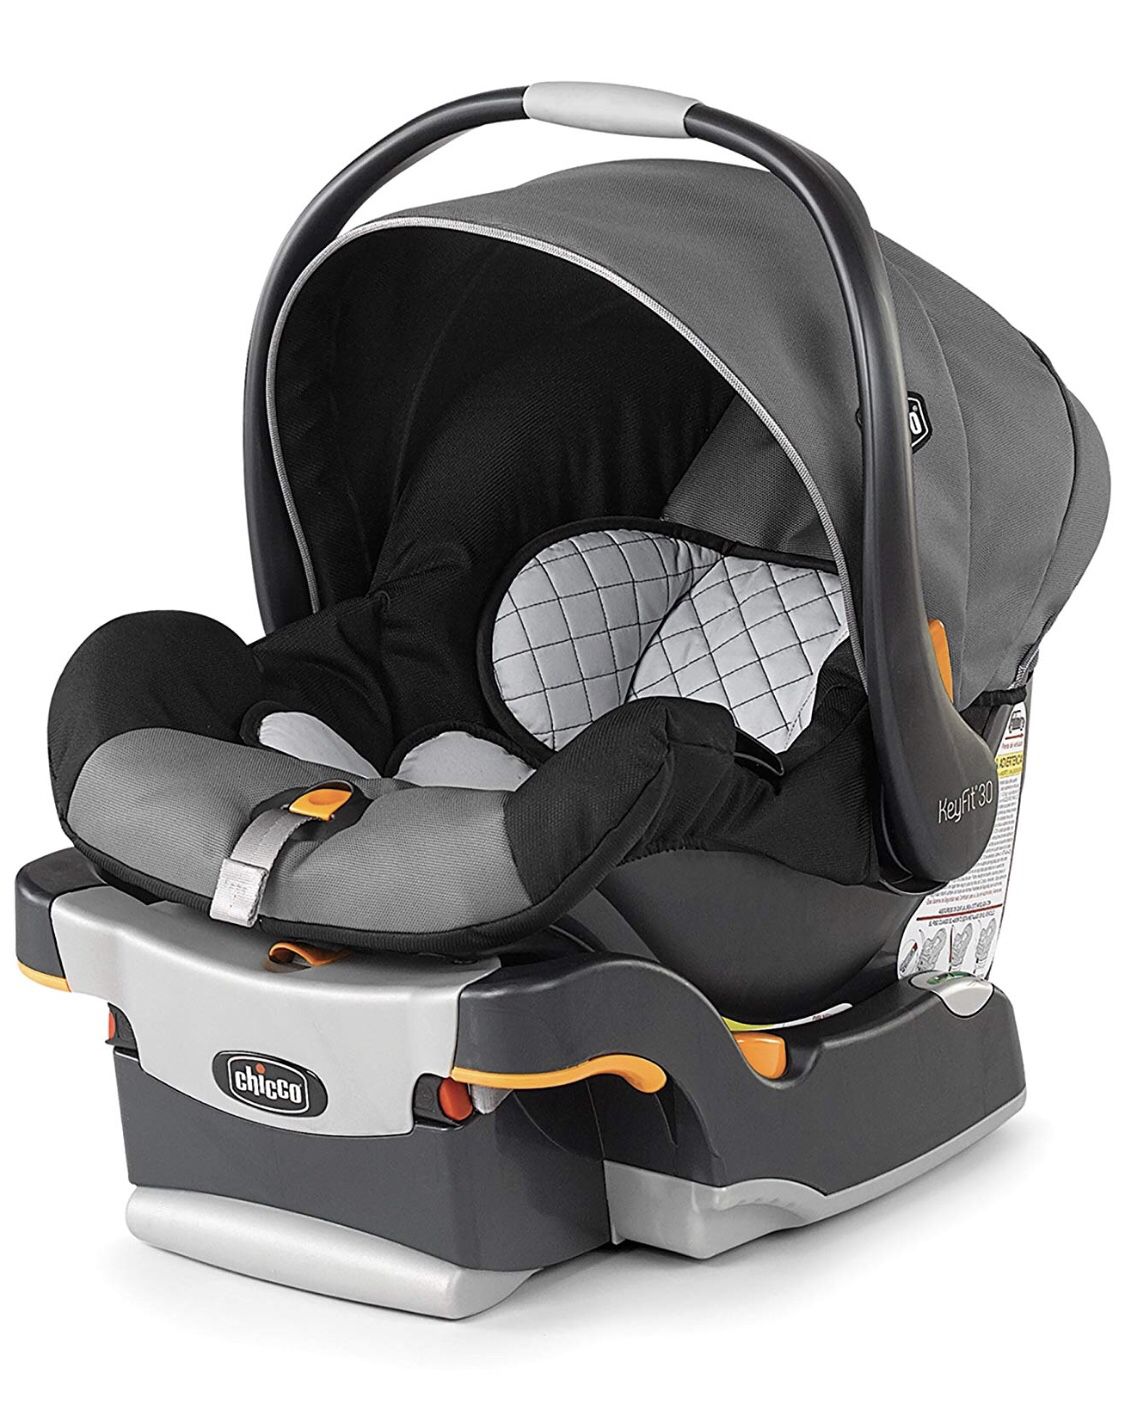 Chicco Keyfit 30 infant car seat